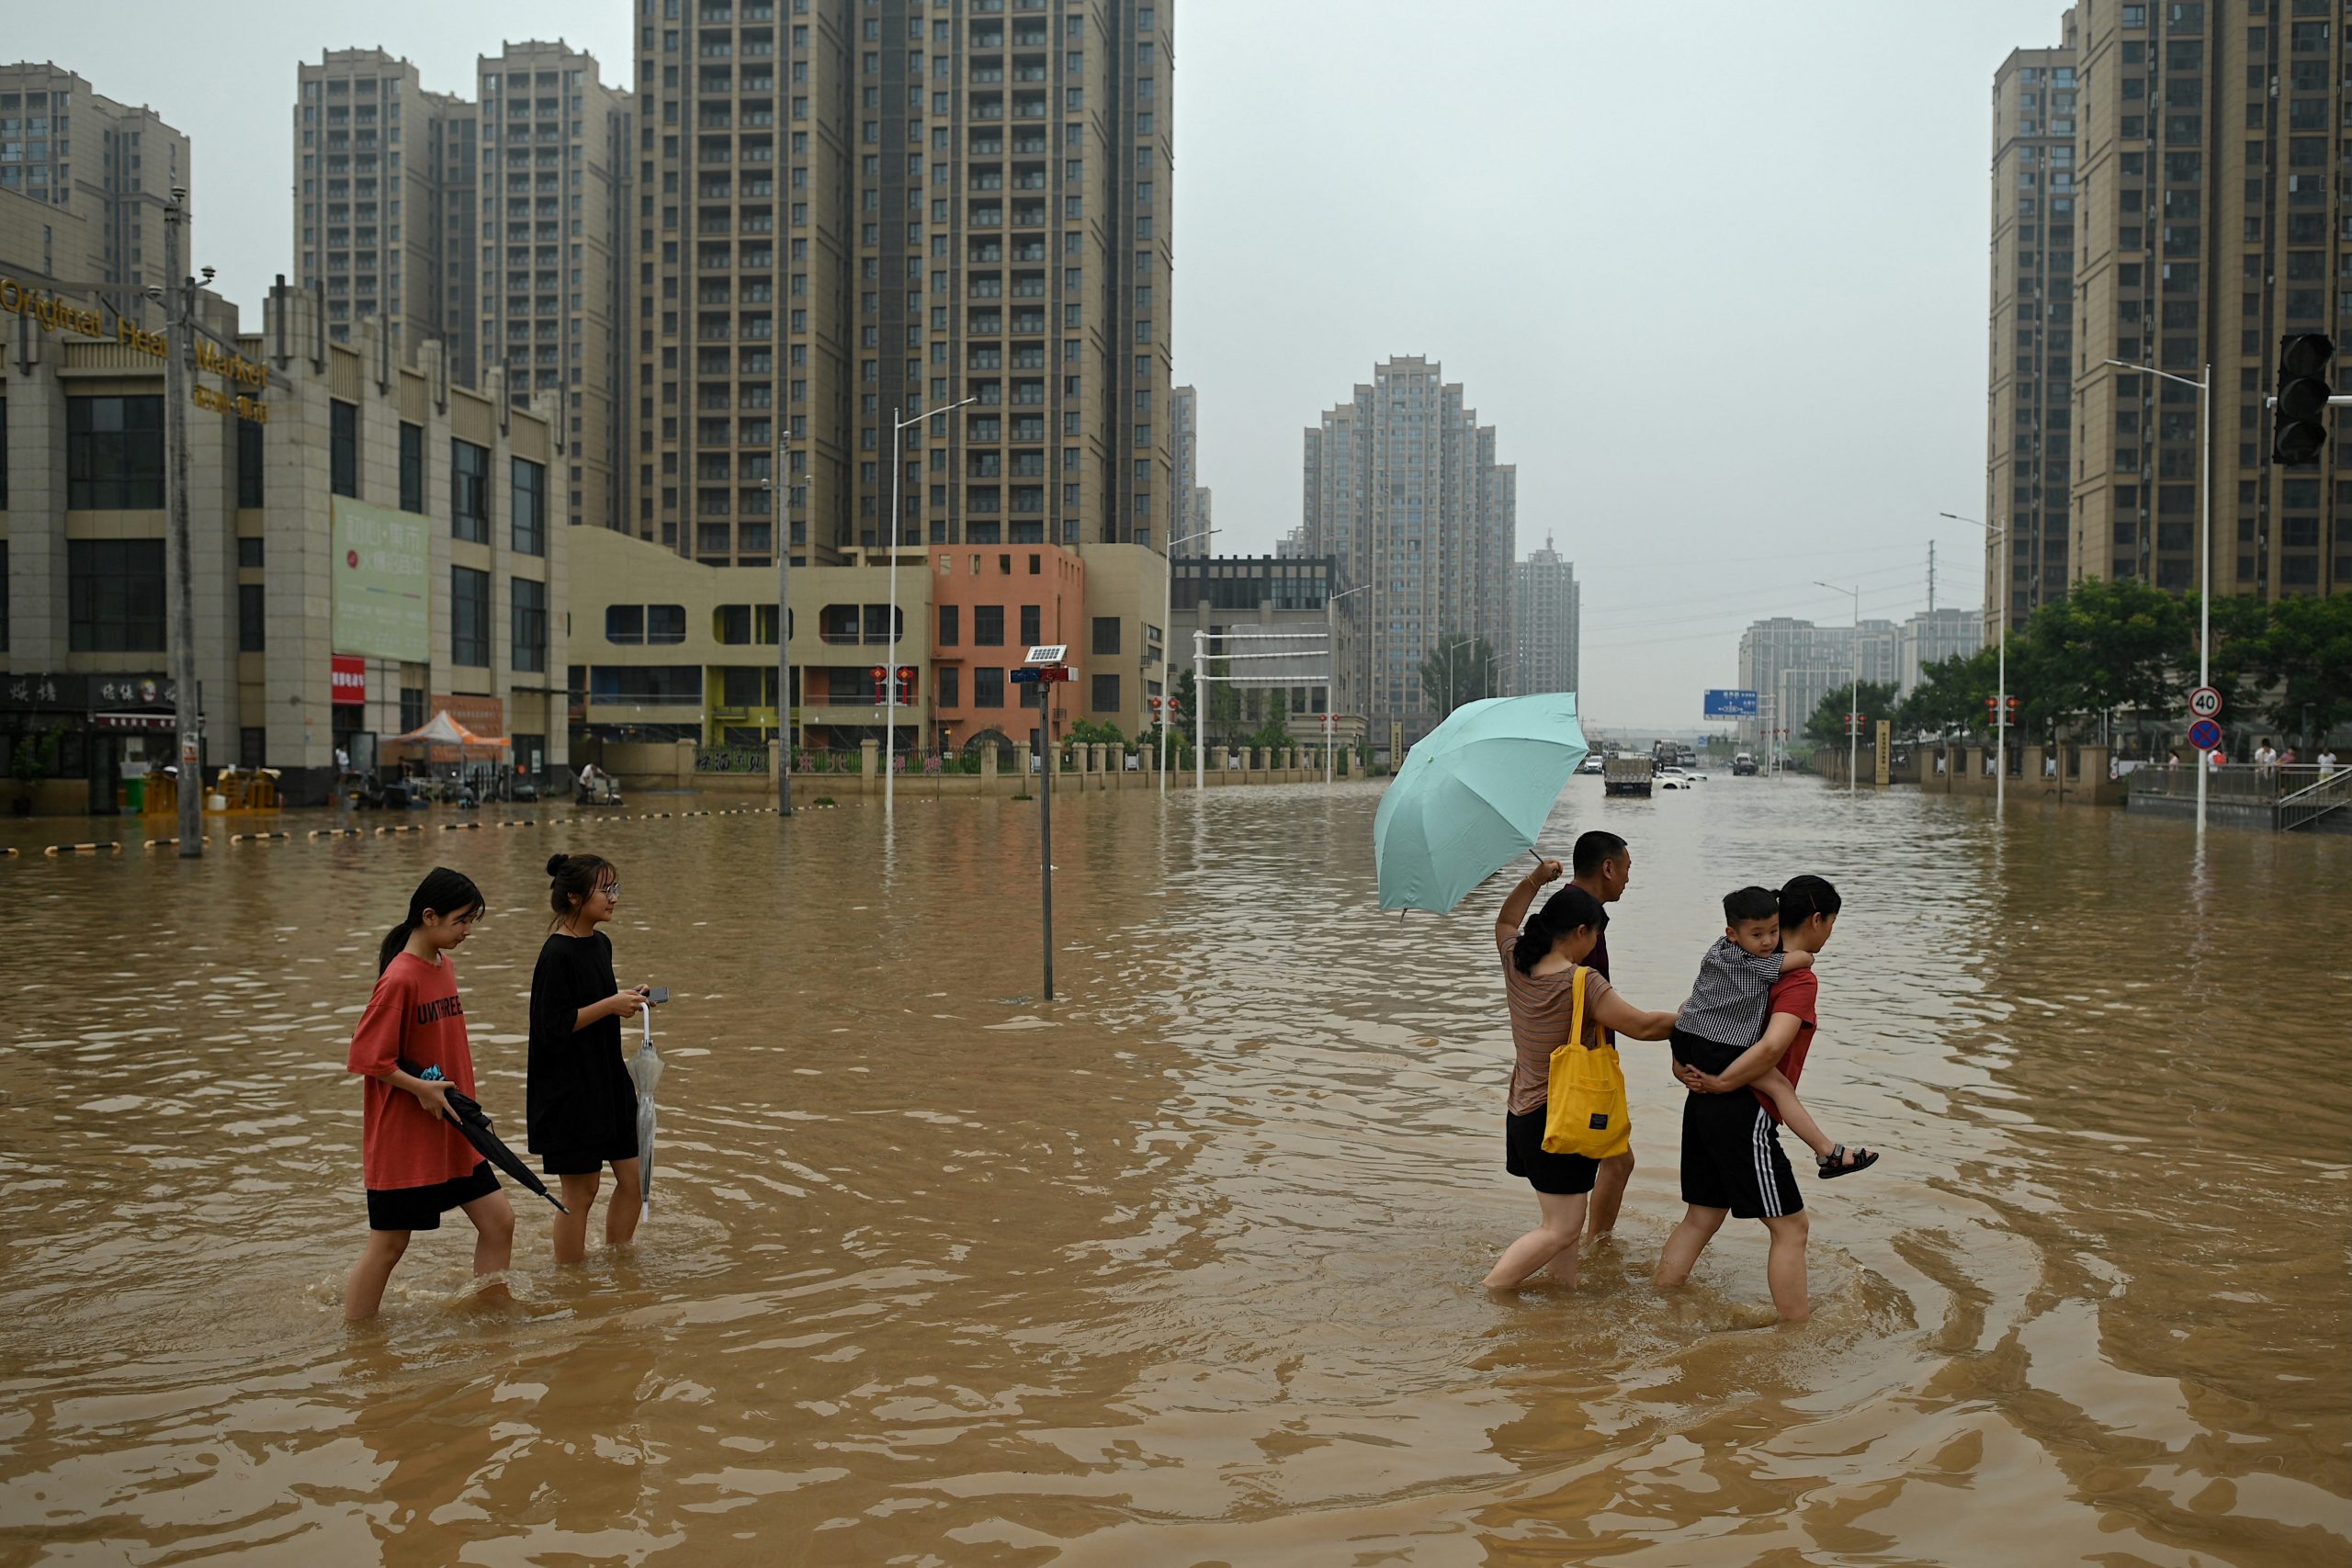 People wade across a flooded street following heavy rains which caused flooding and claimed the lives of at least 33 people earlier in the week, in the city of Zhengzhou in China's Henan province on July 23, 2021.